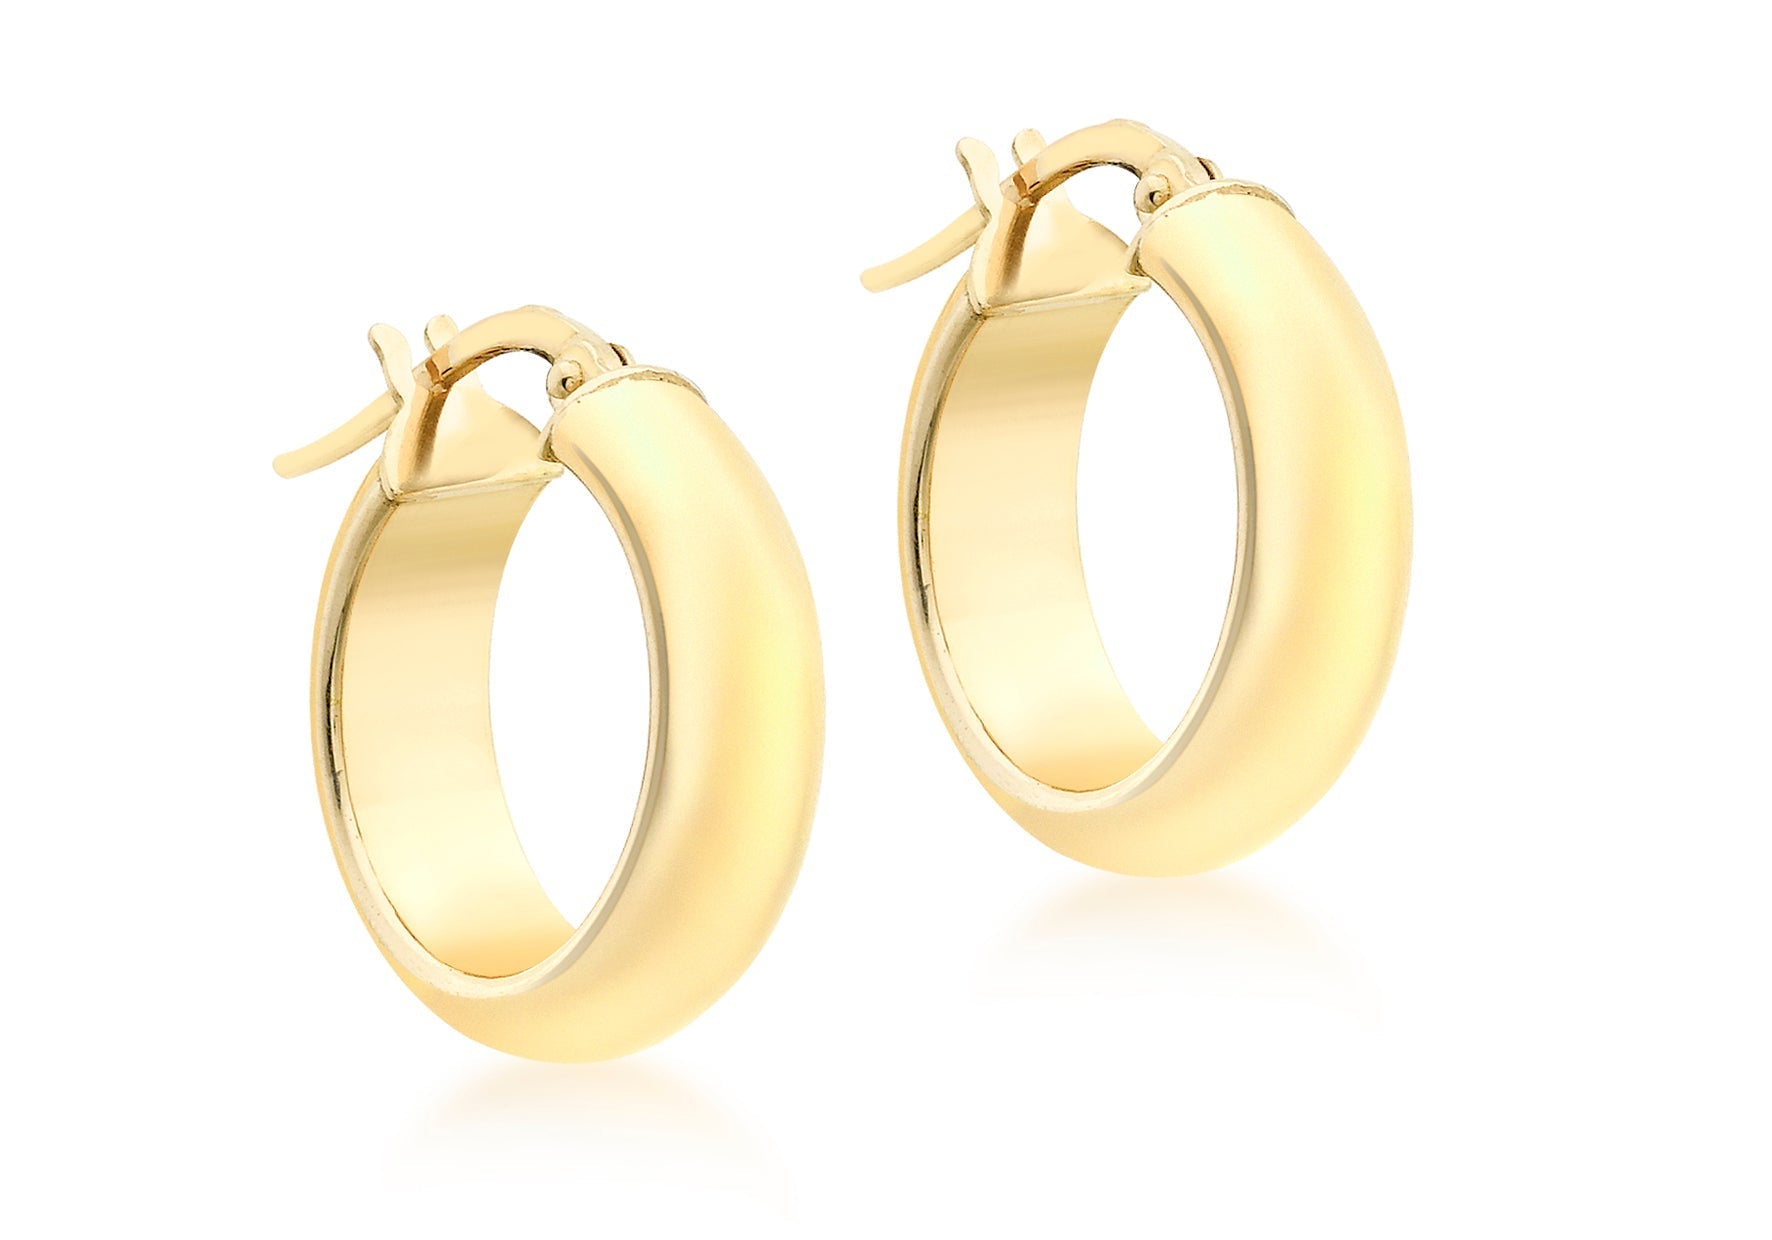 9ct Yellow Gold Round Hoop Earrings 19mm